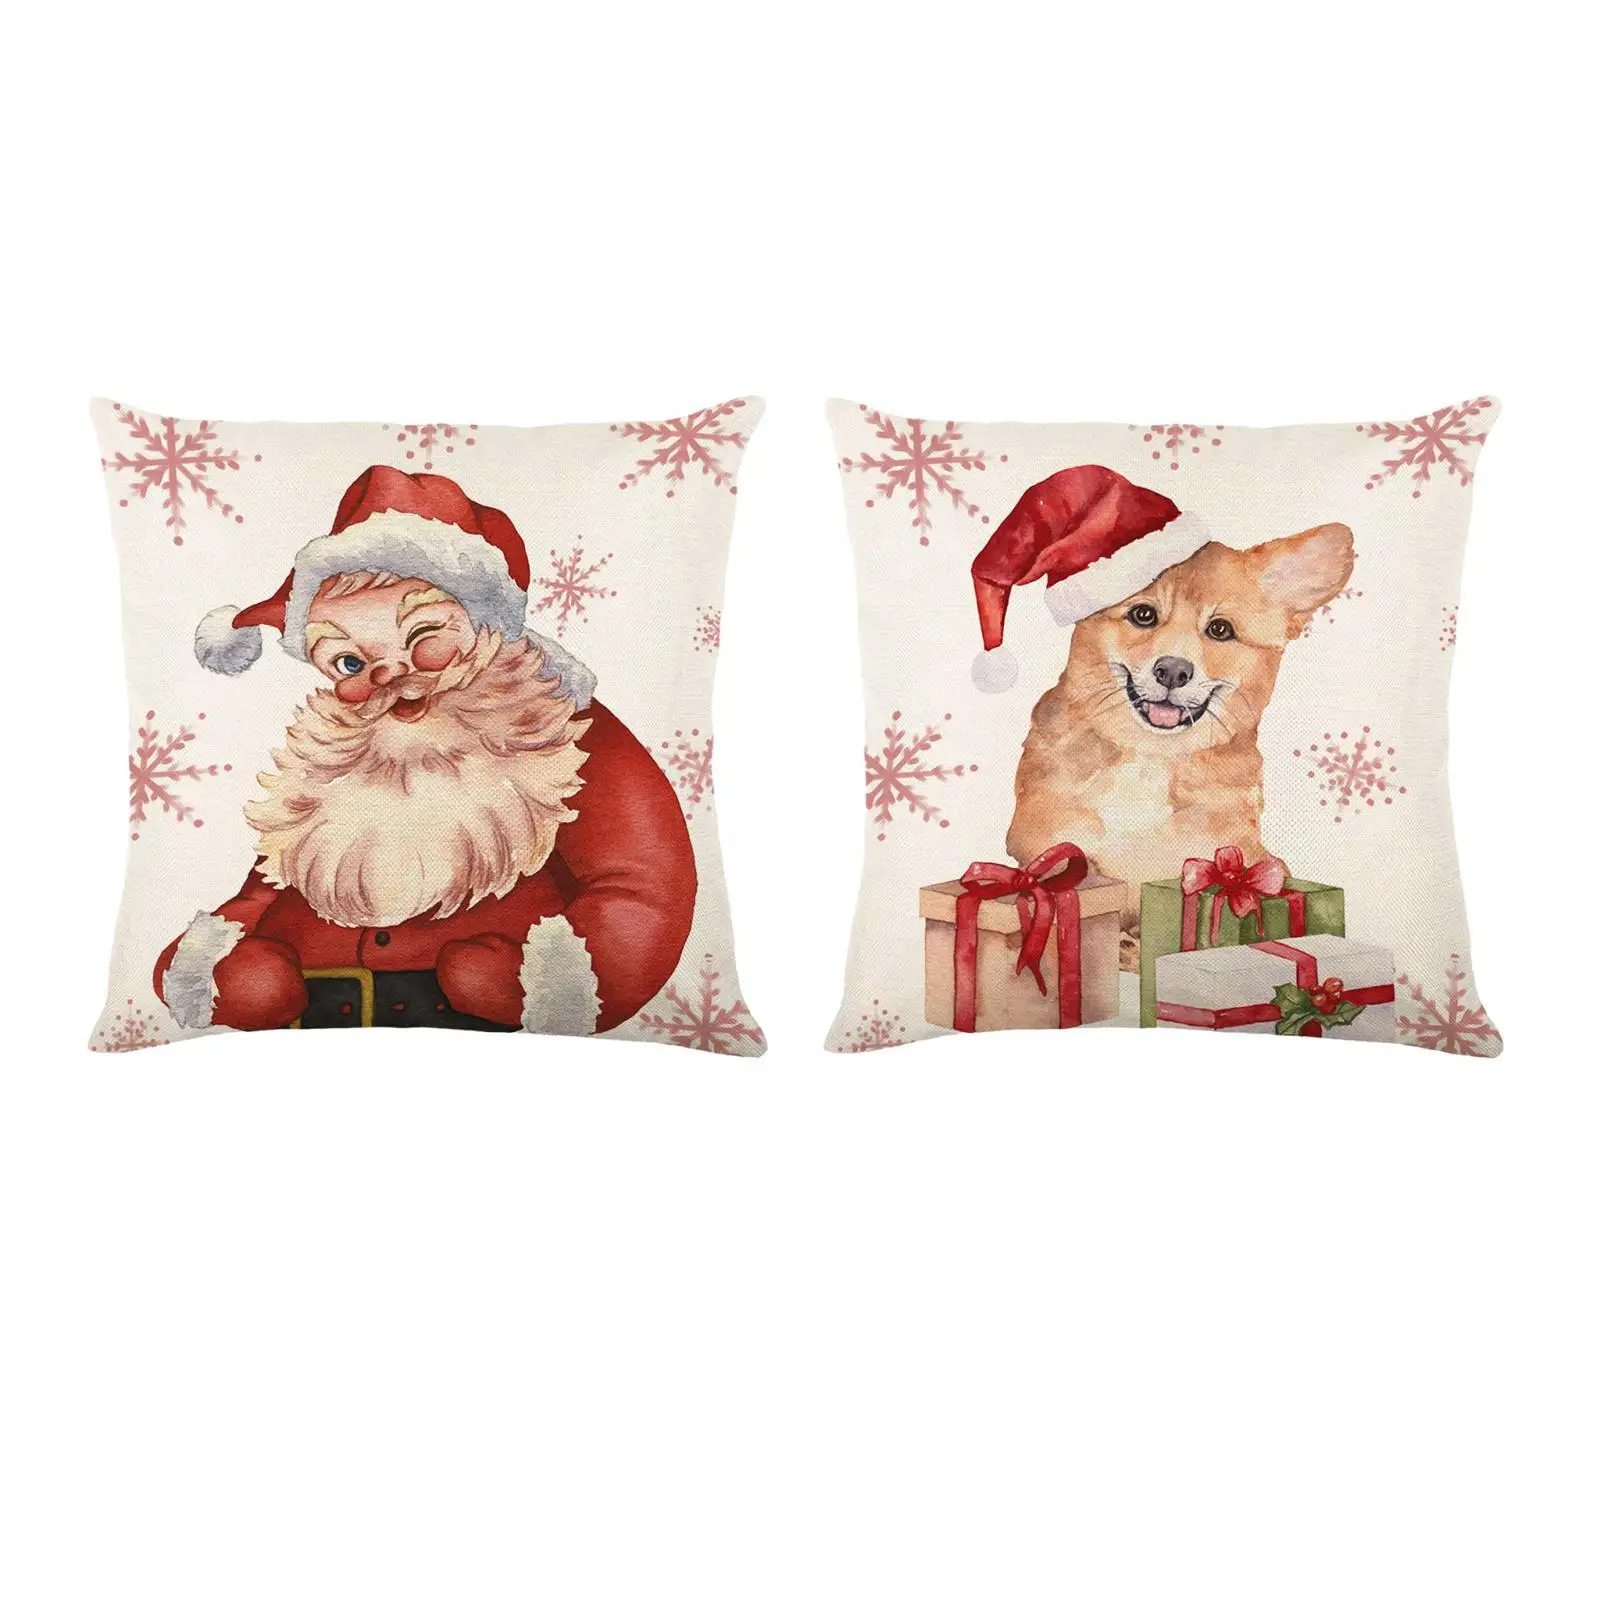 Christmas Throw Pillow Cover Breathable Zippered Decorative Pillow Case Cushion Cover for Car Bedroom Bed Farmhouse Decor